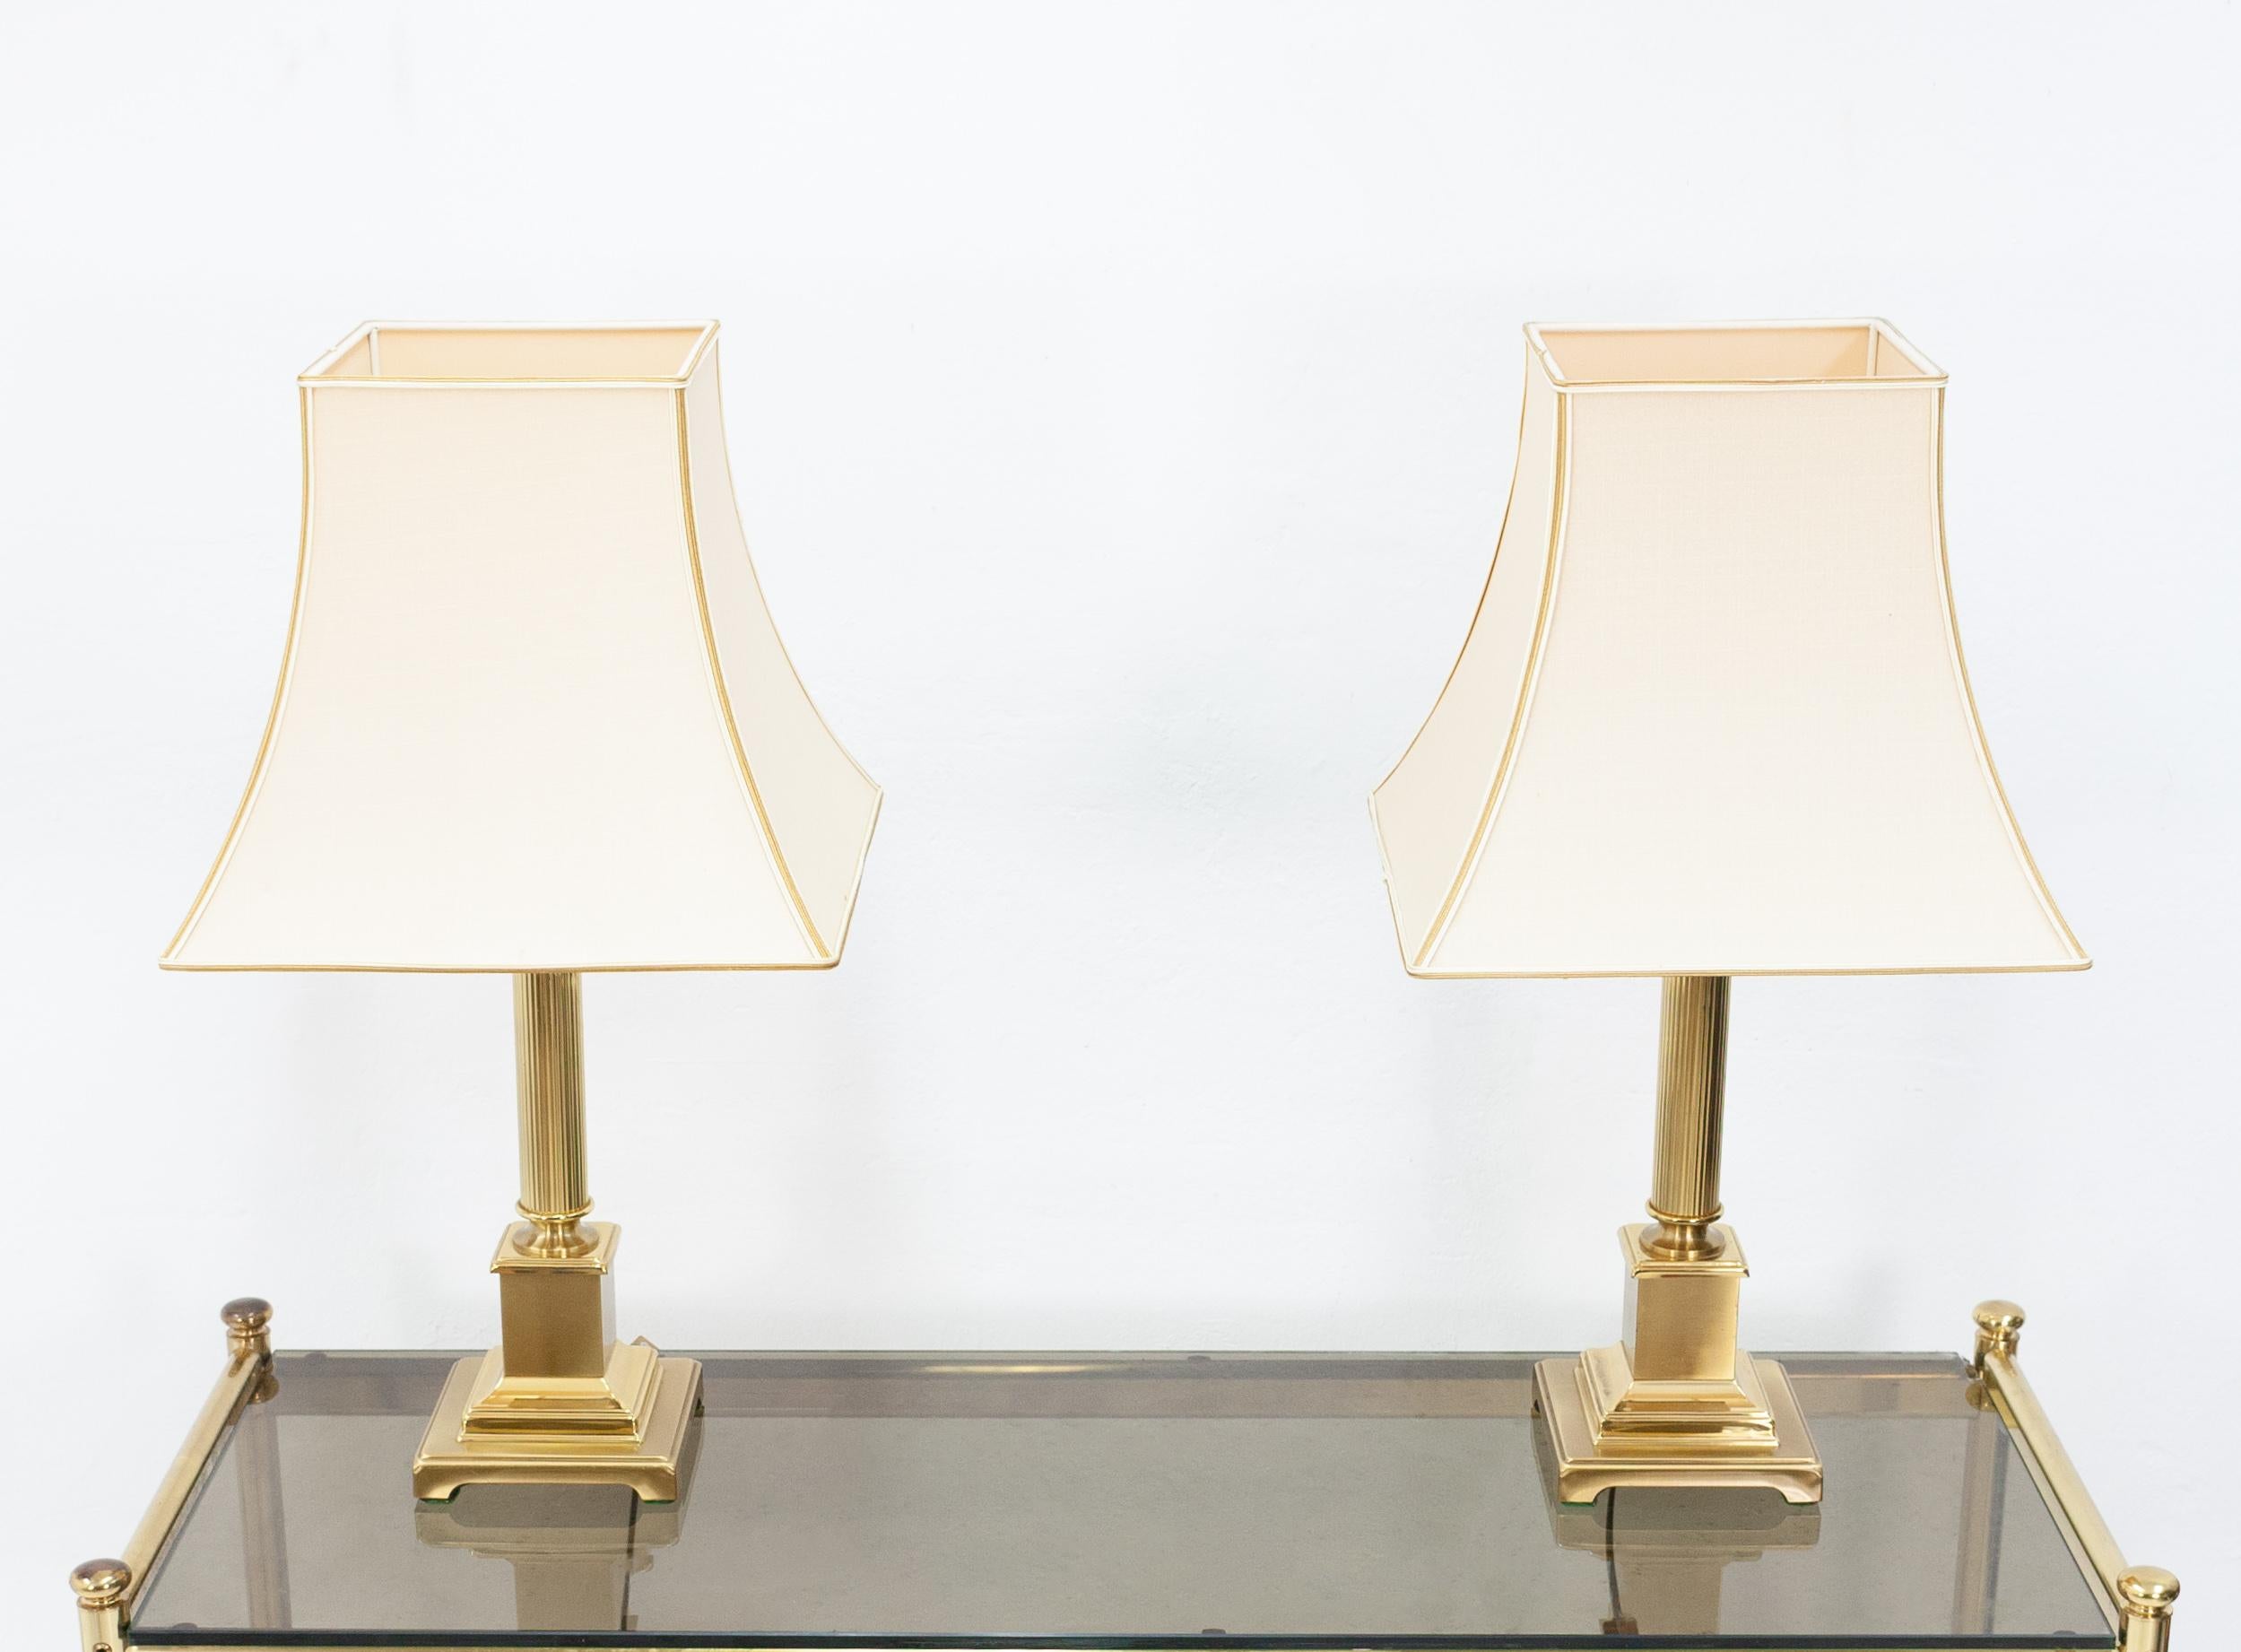 Two Herda brass table lamps. Herda Holland 1970s .Very nice design. Looking great in a eclectic interior.
Very good condition. With the original shades. Also in a good condition. 






  